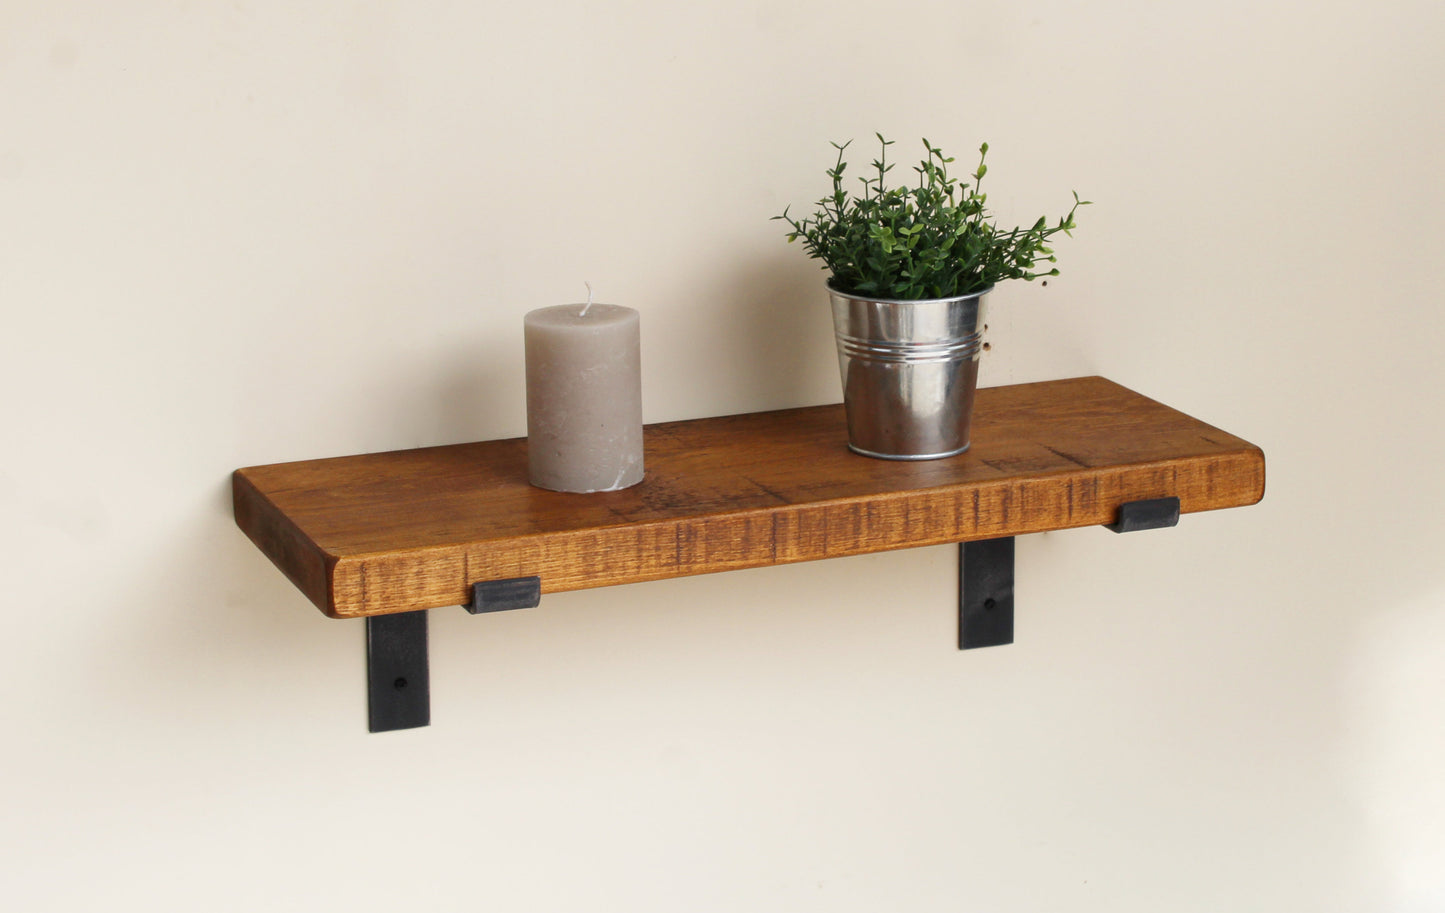 Chunky Rustic Wooden Wall Shelves with Industrial Style Bracket | 22.5cm depth